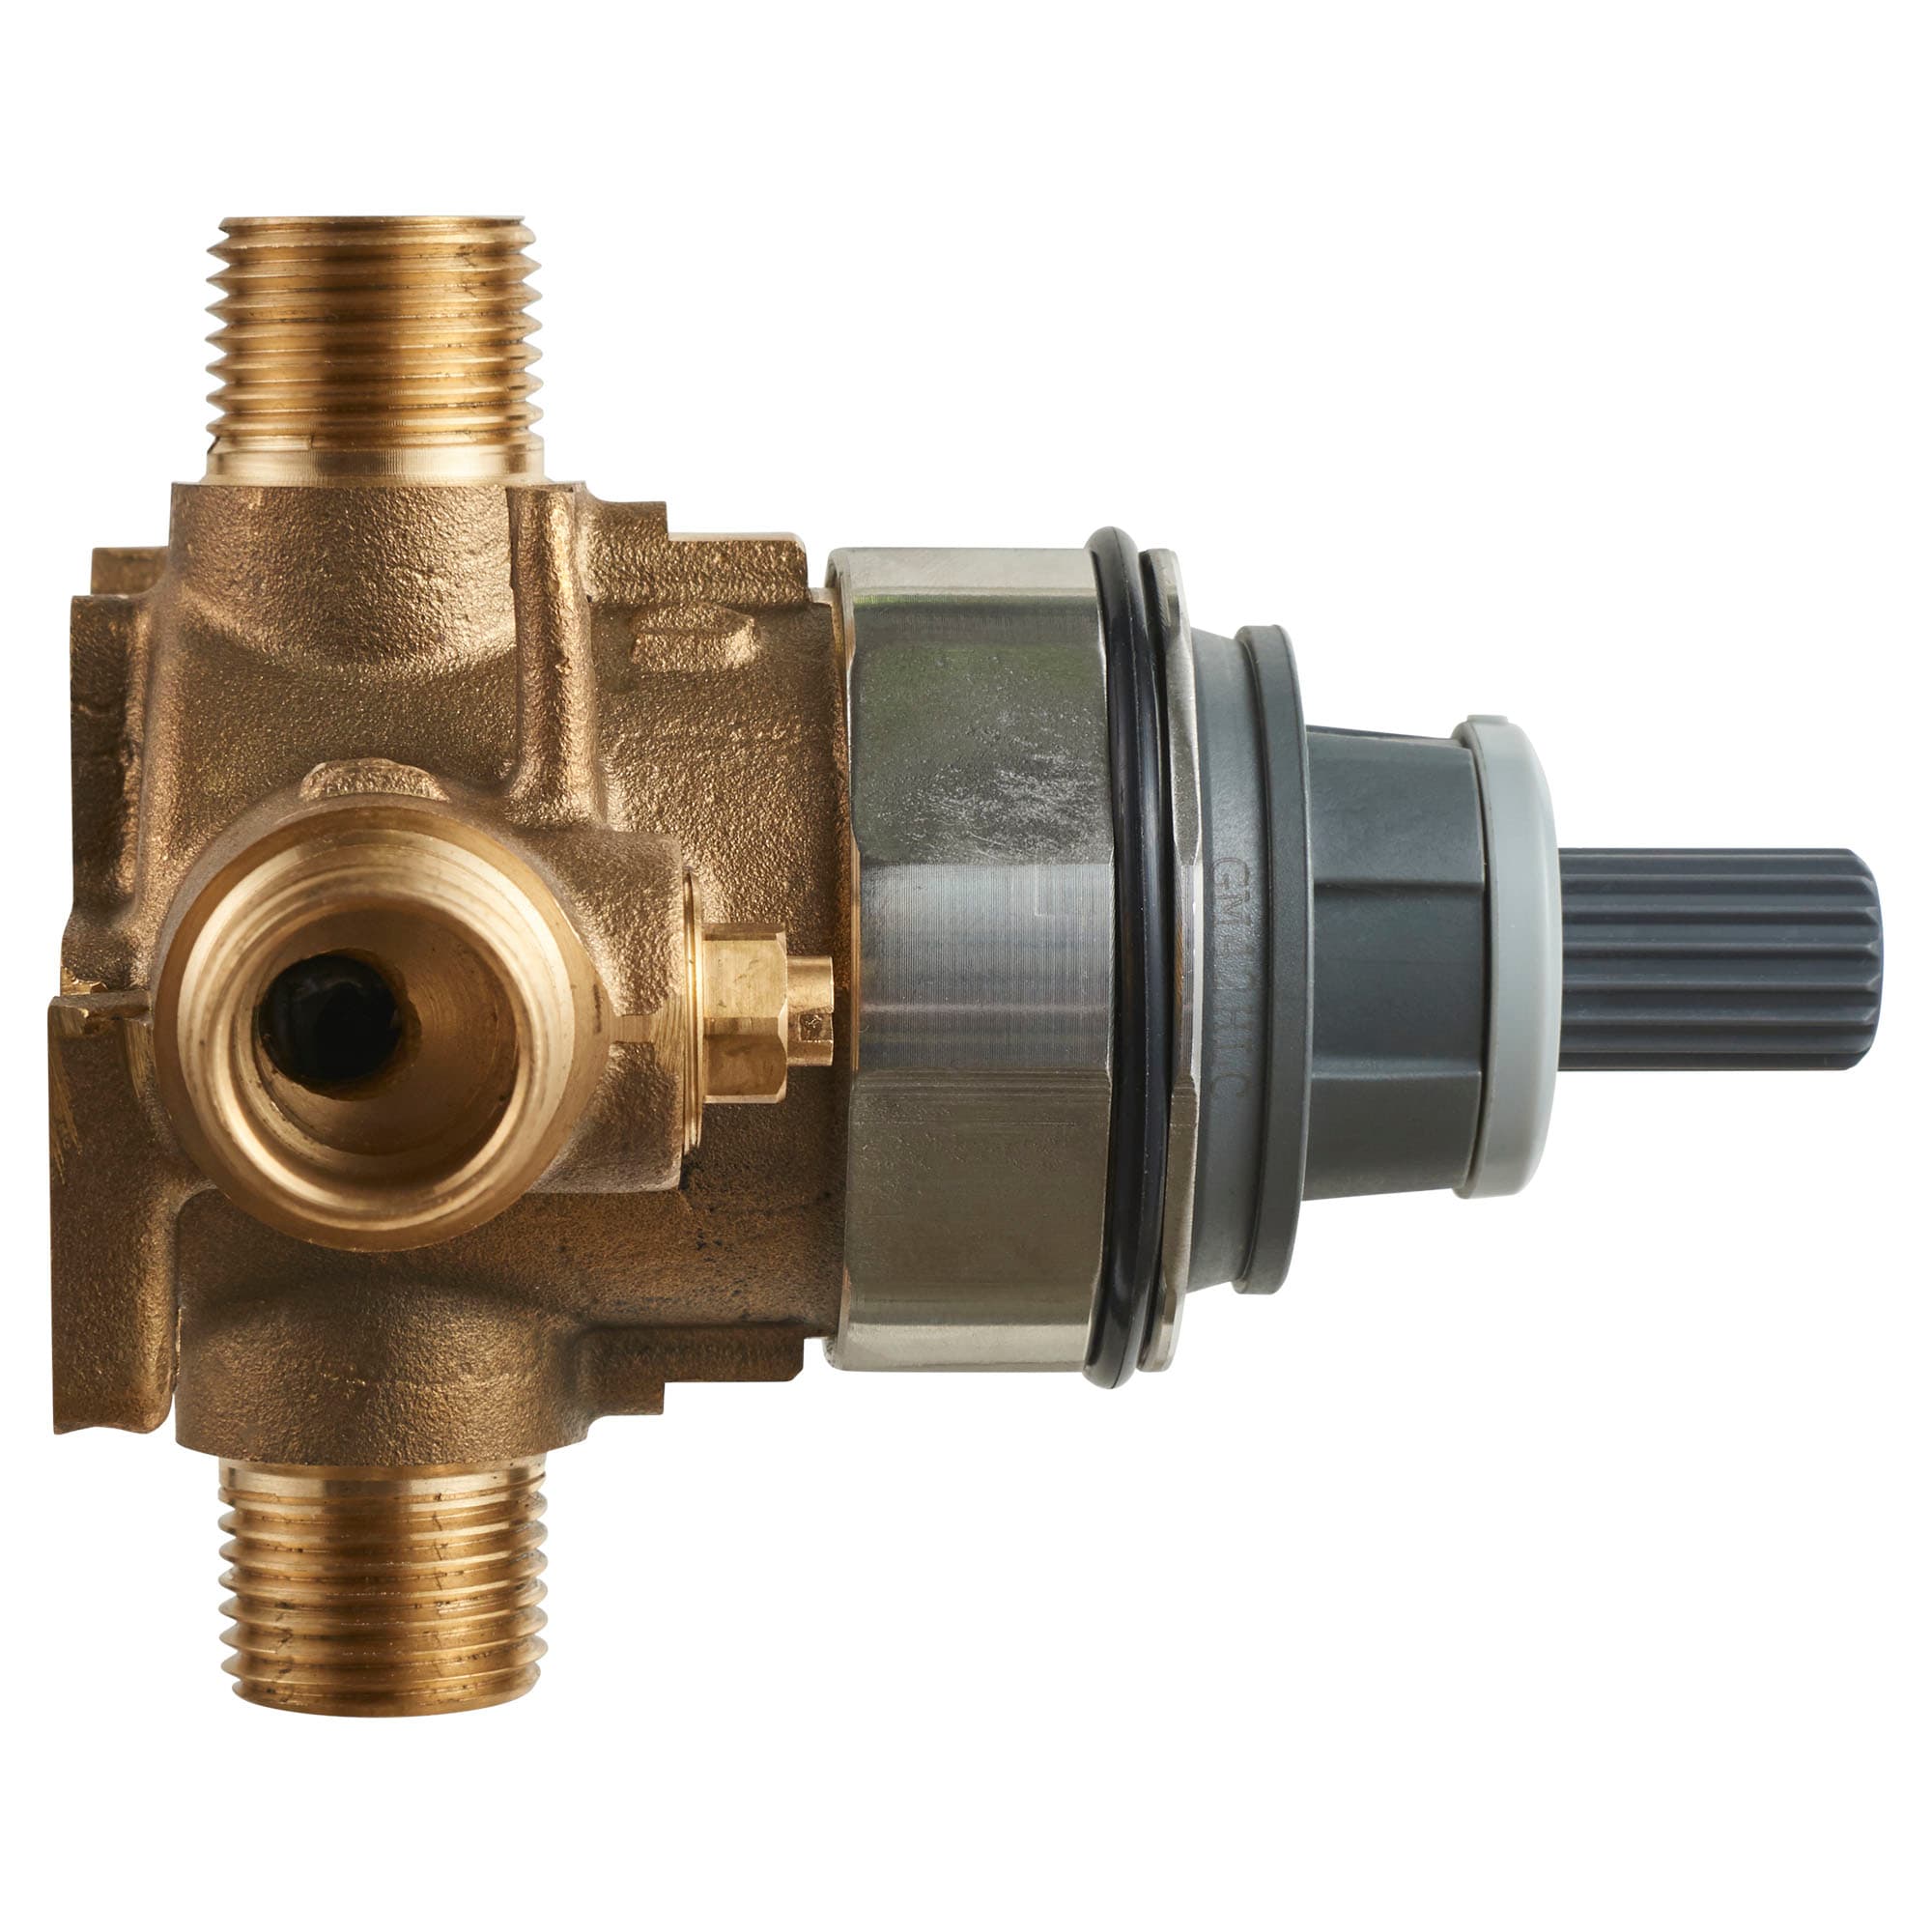 American Standard R121 Pressure Balance Rough in Valve Body for sale online 